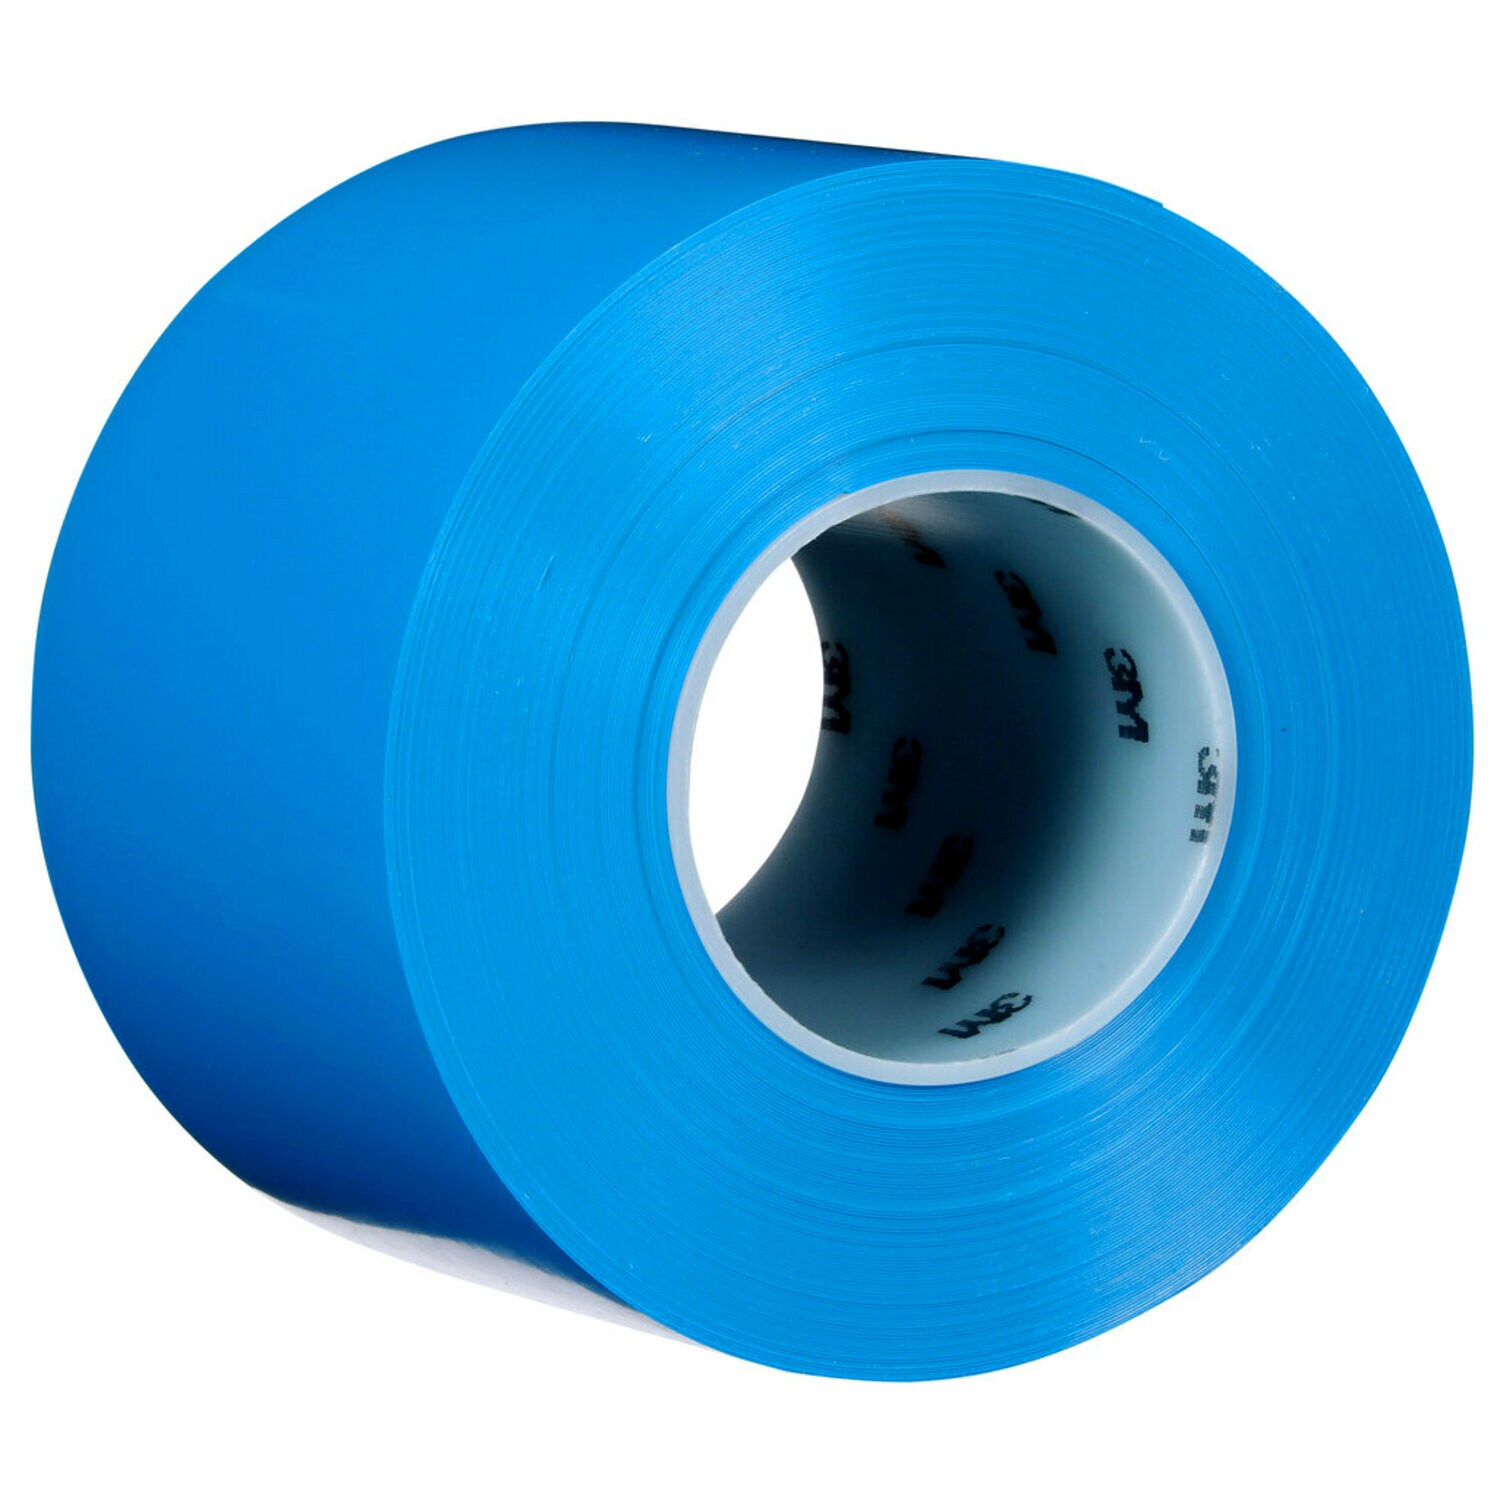 7100254036 - 3M Durable Floor Marking Tape 971, Blue, 4 in x 36 yd, 17 mil, 3 Rolls/Case, Individually Wrapped Conveniently Packaged